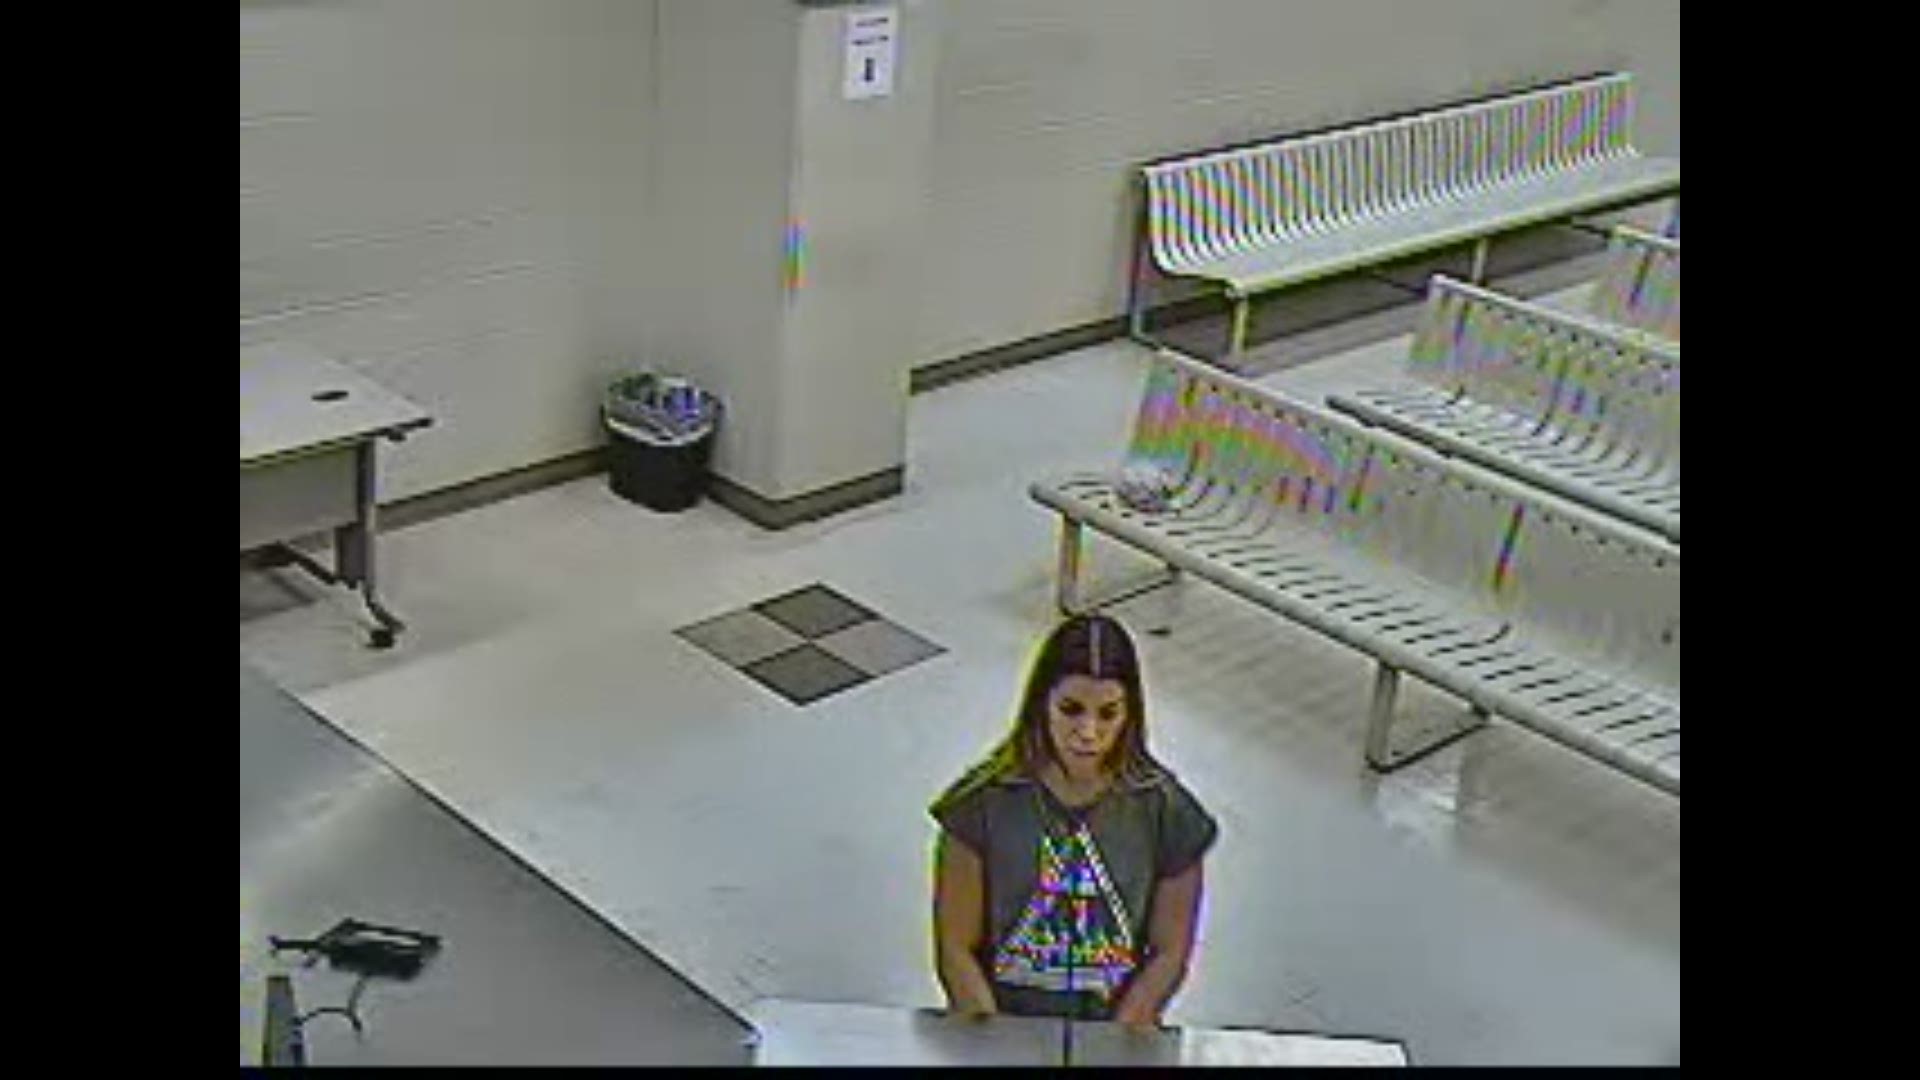 Alexandra Ciliento's initial appearance video.